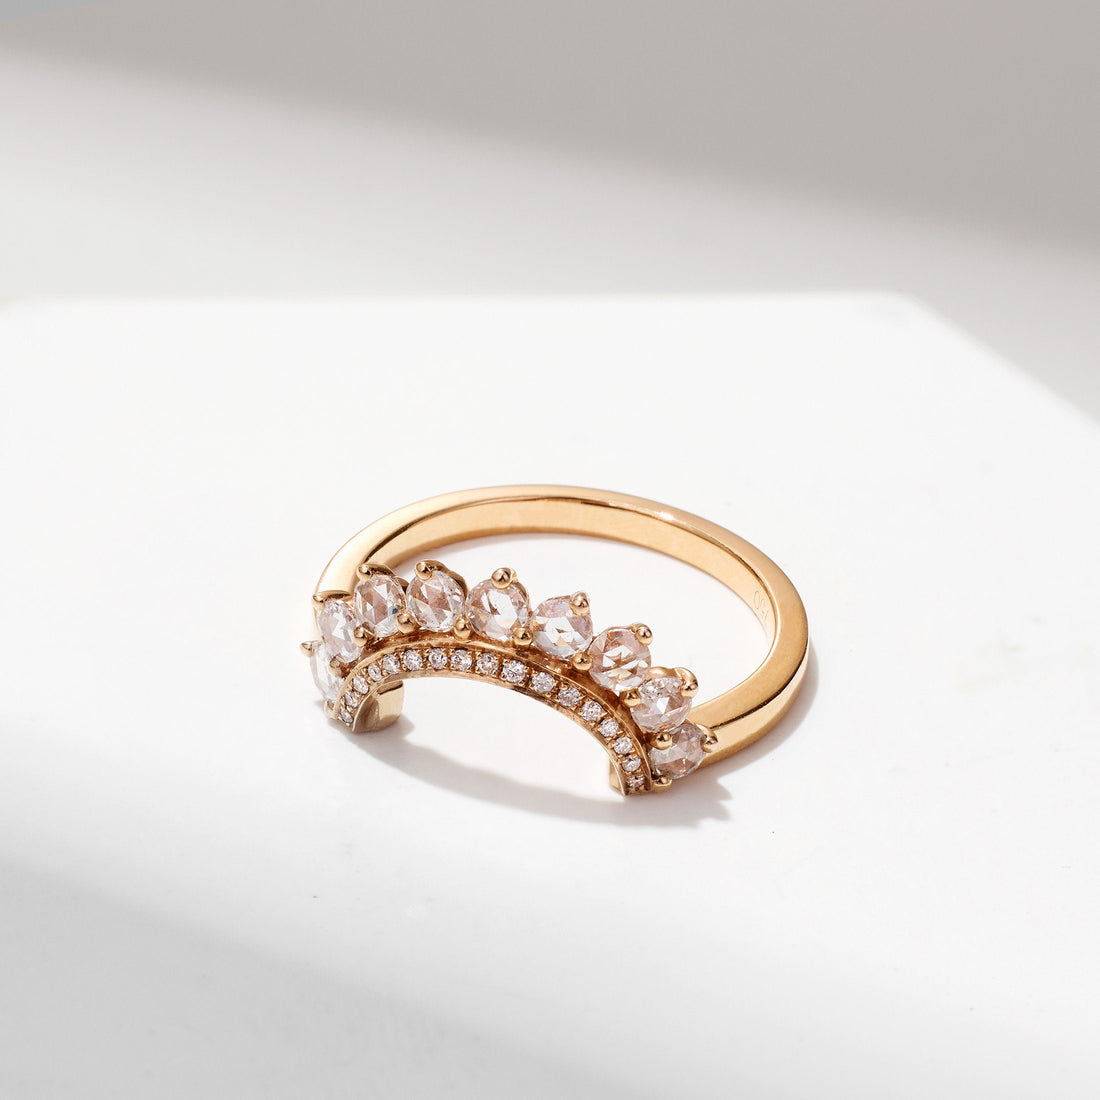 Vintage-Style Contoured Diamond Ring in 18K Rose Gold